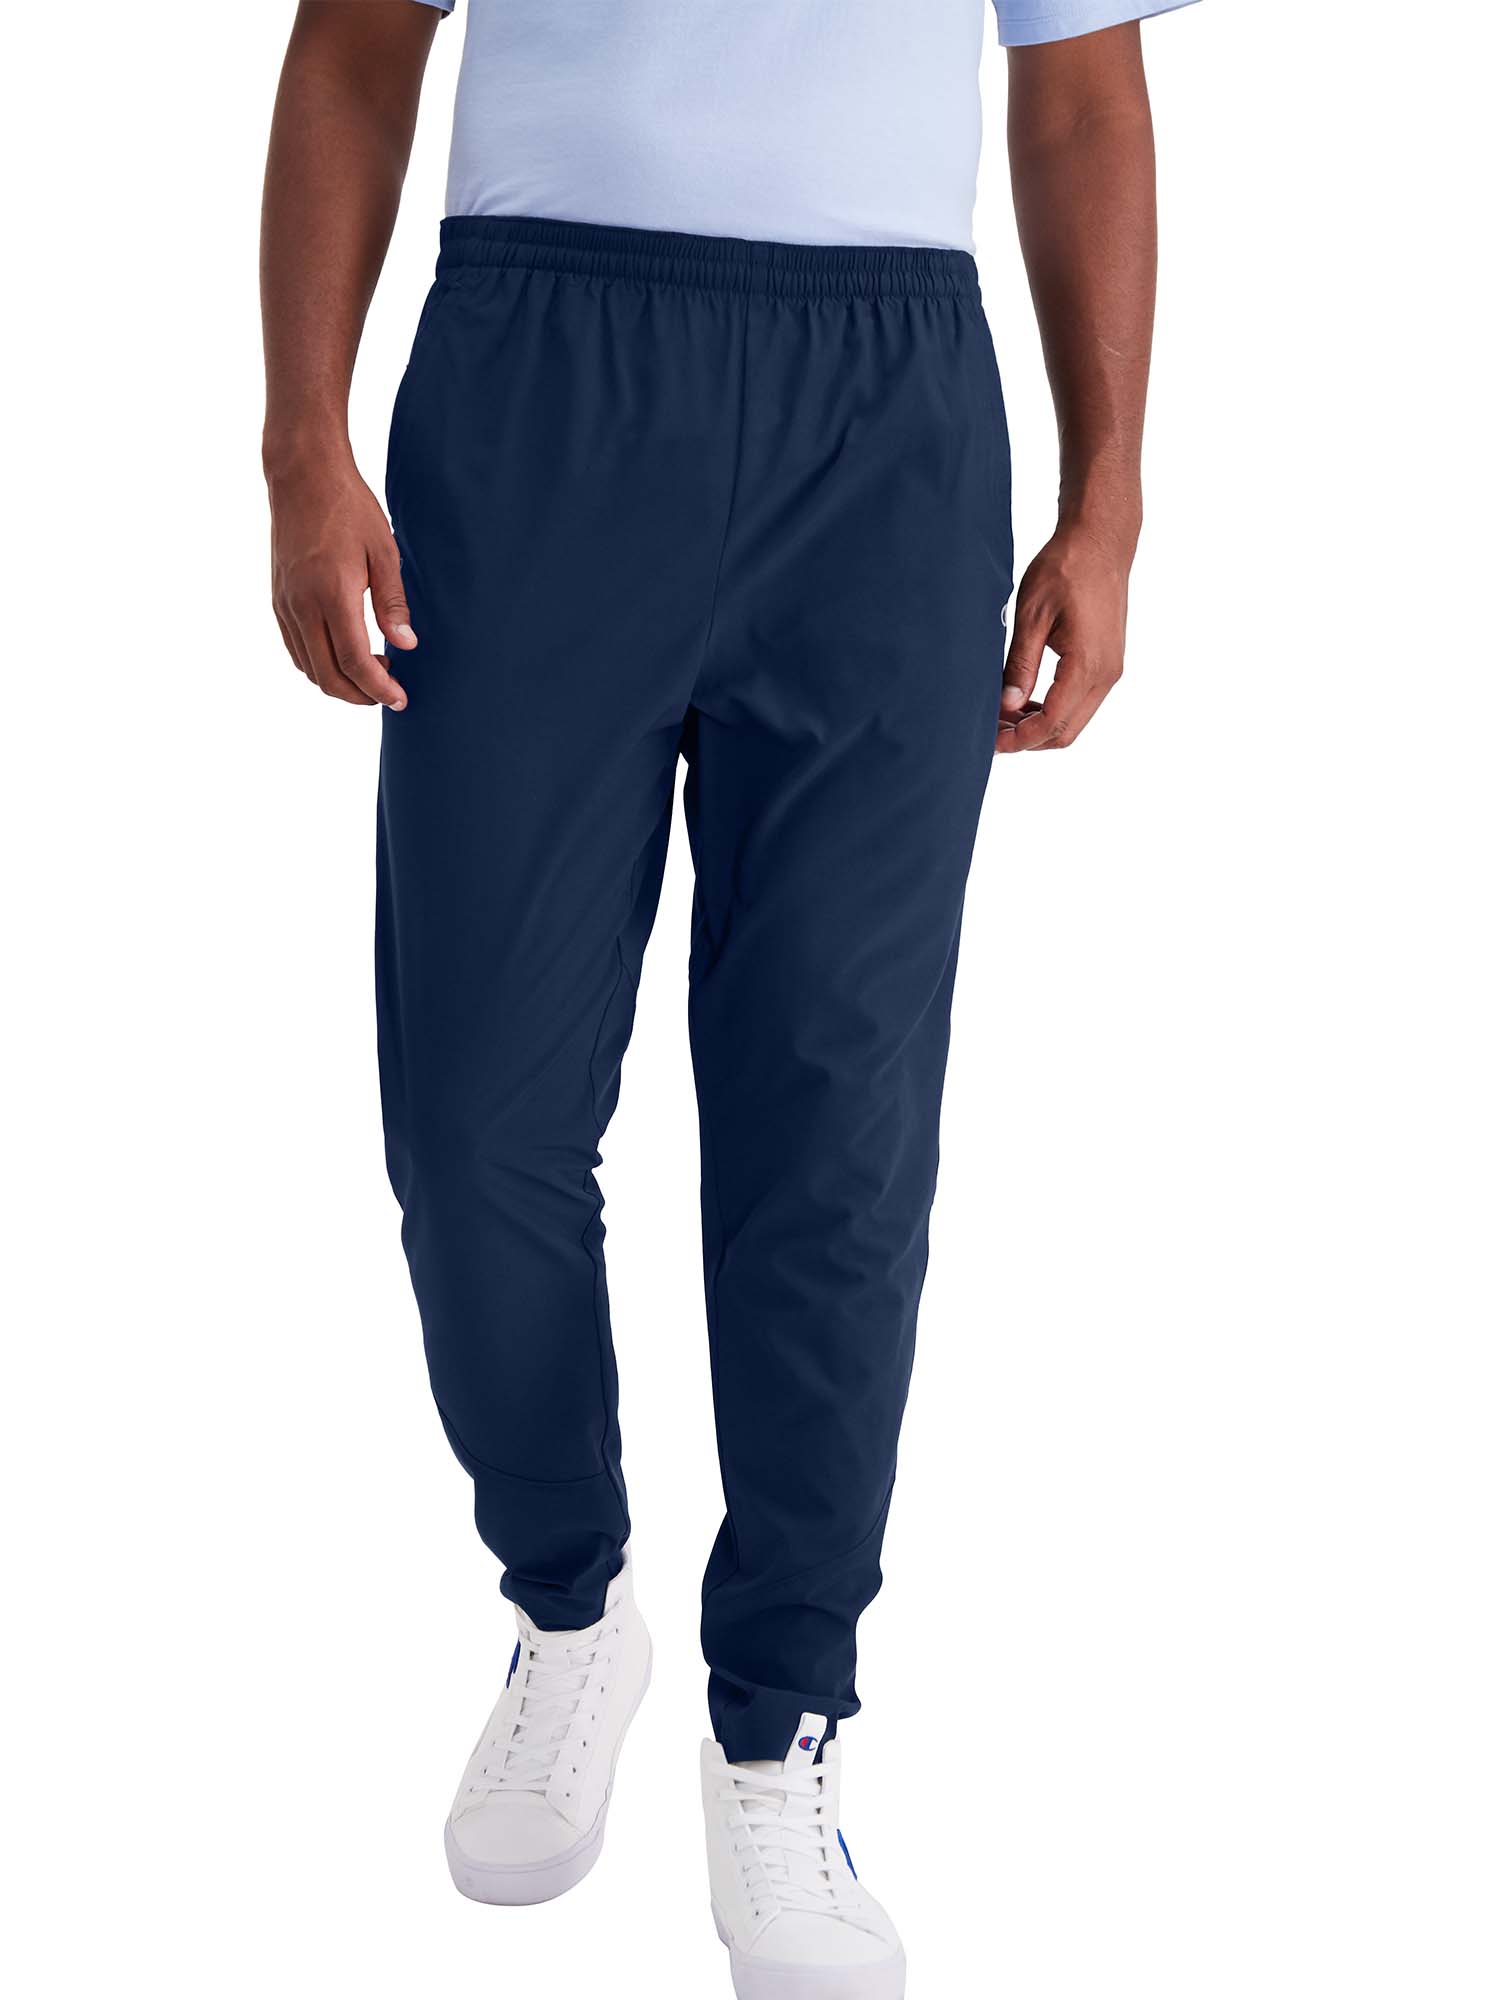 Champion Men's Core Performance Training Sport Pant 30.5" inseam length, up to Size 2XL - image 1 of 6